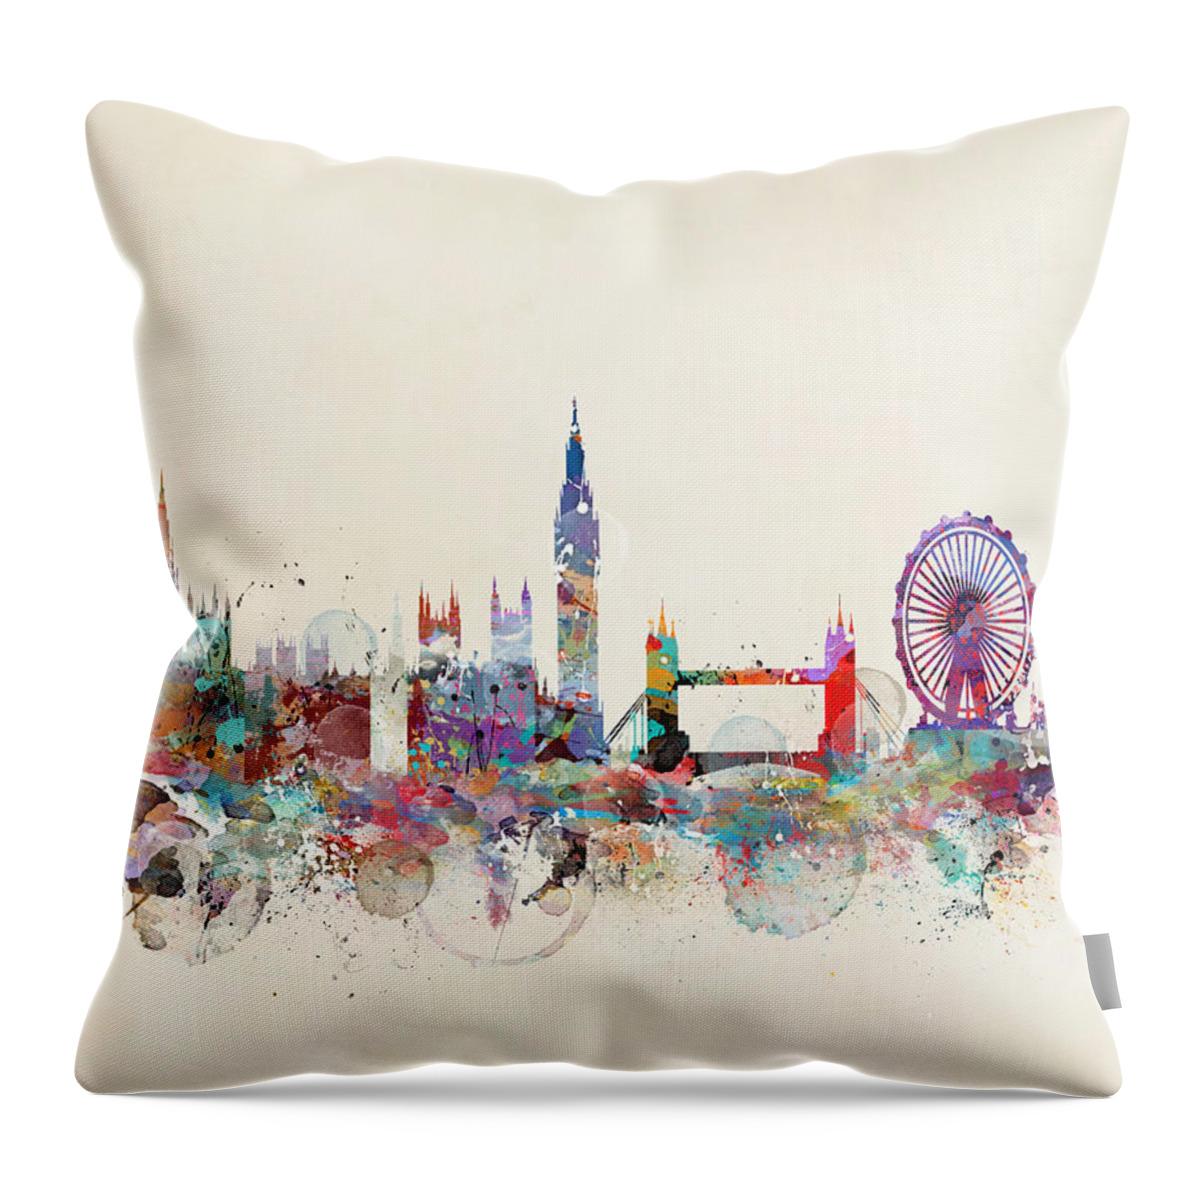 London Throw Pillow featuring the painting London City Skyline by Bri Buckley